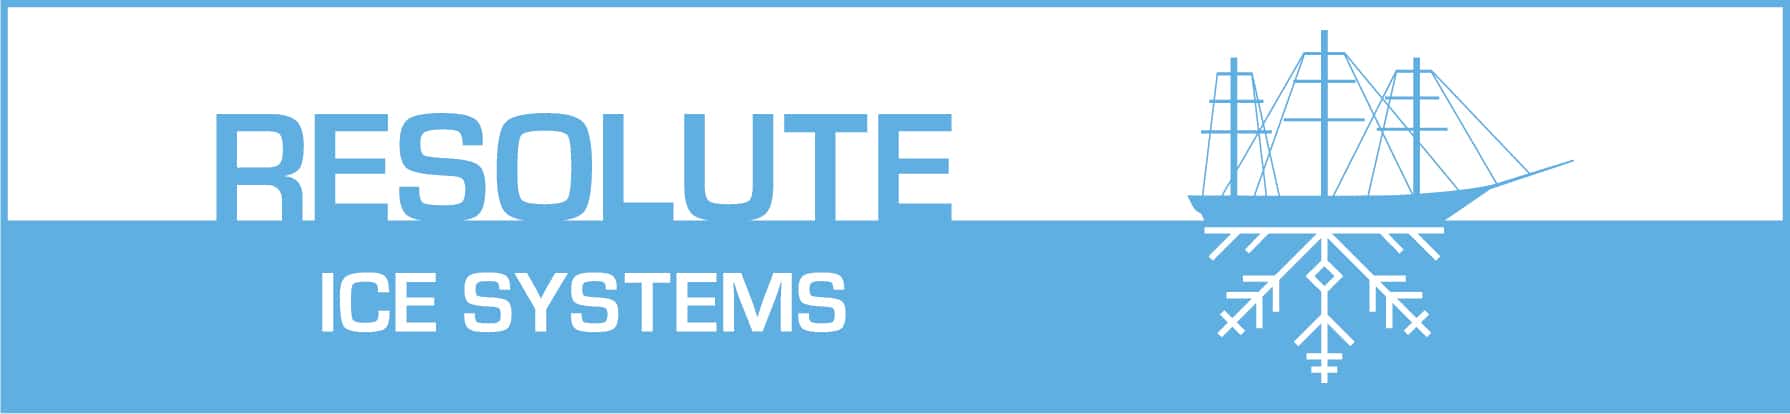 Resolute Ice Systems